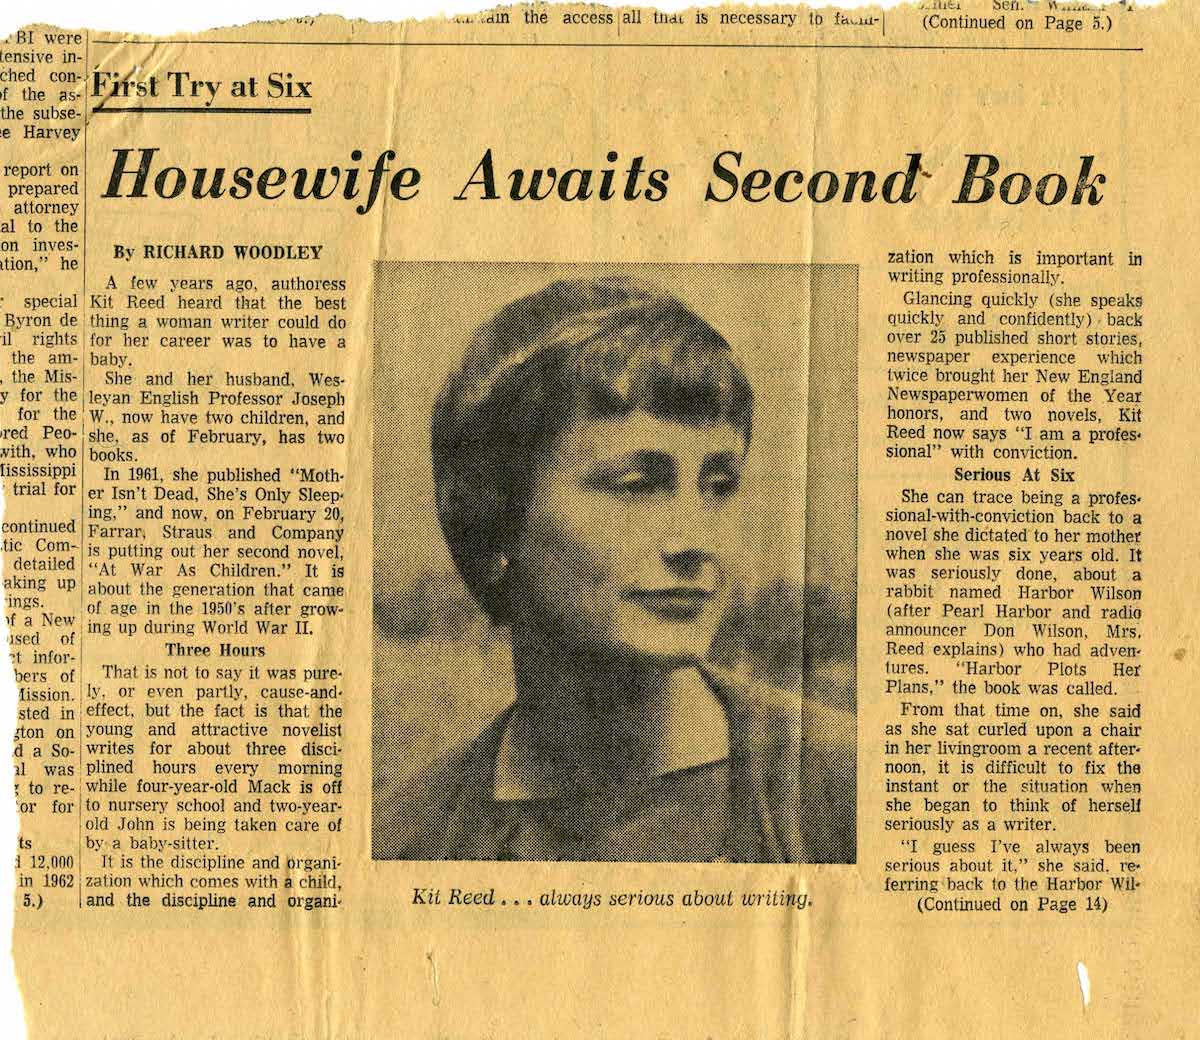 A yellowed newspaper clipping with the headline Housewife Awaits Second Book above a black and white photo of a short haired woman named Kit Reed.